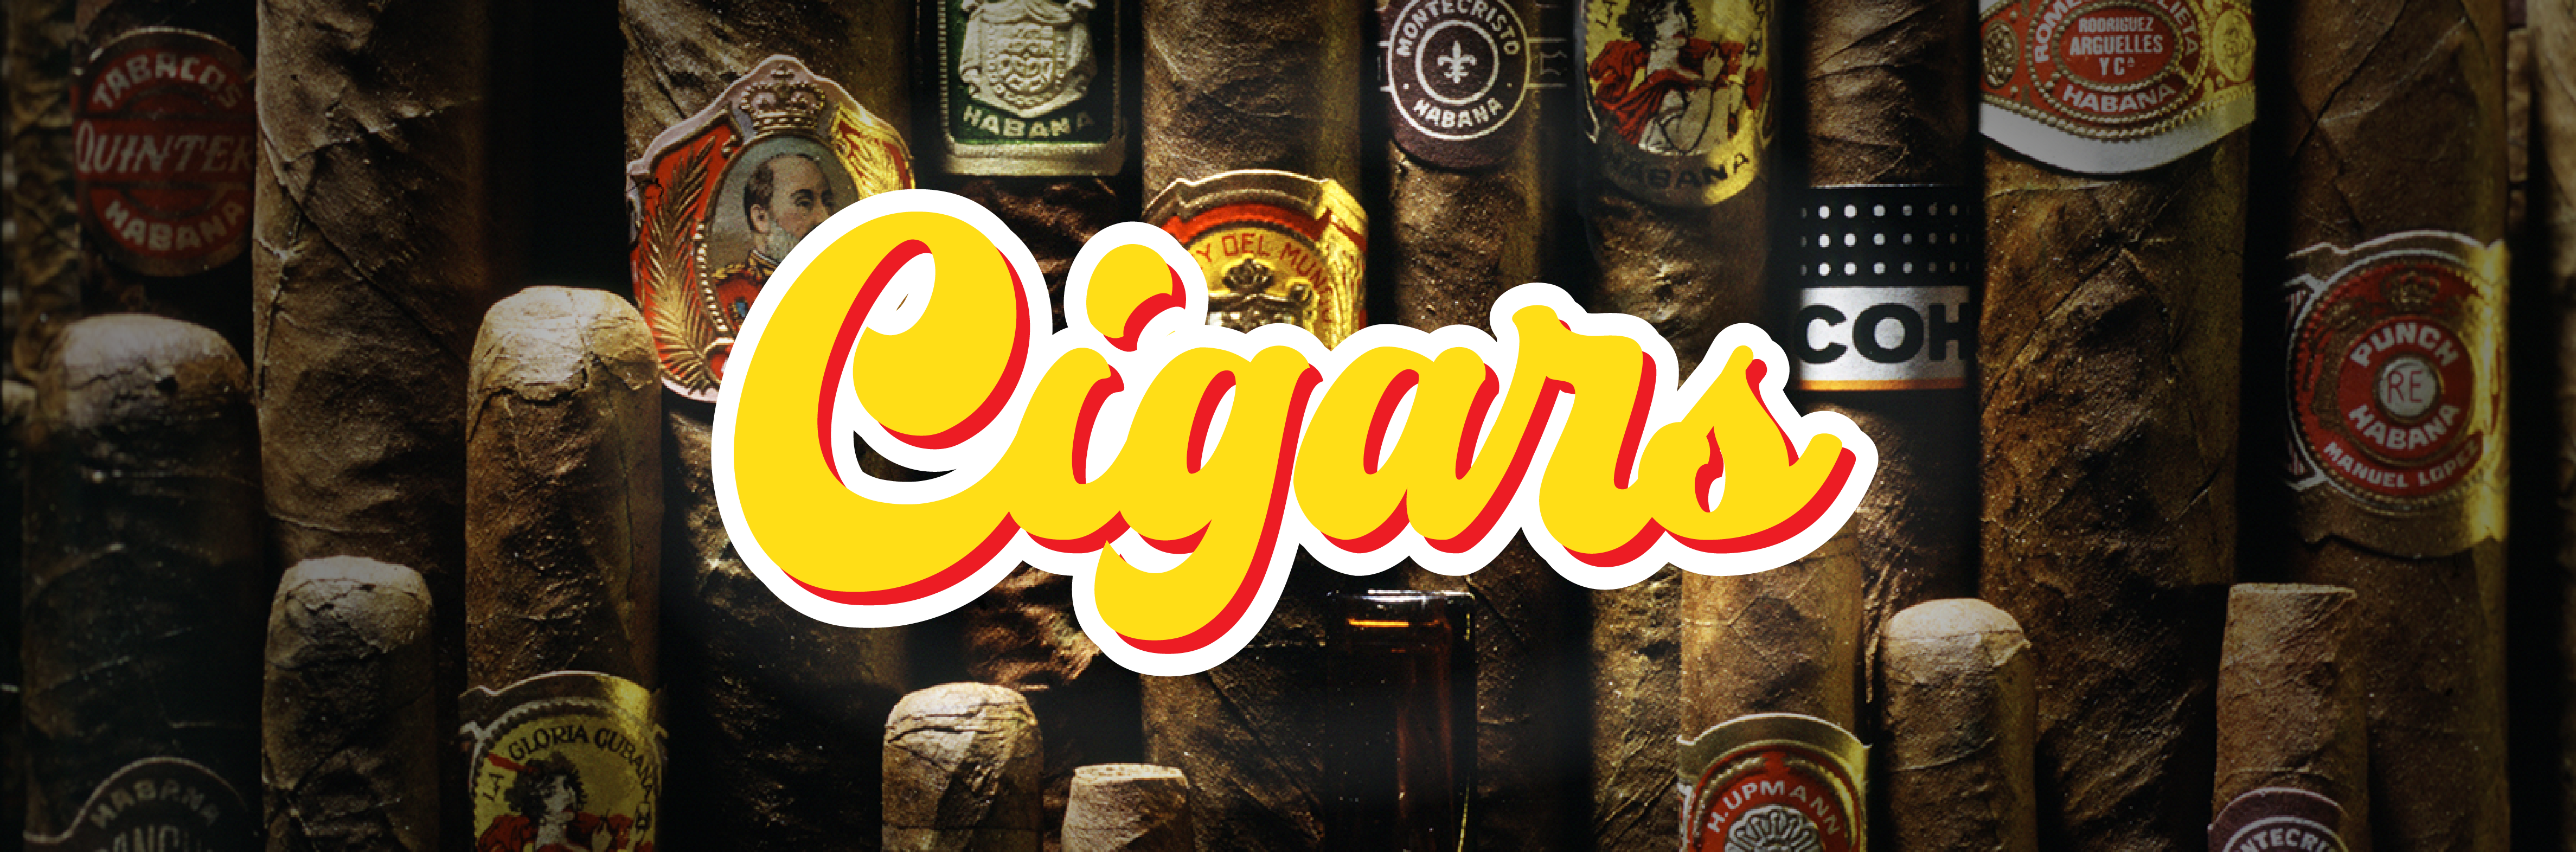 cigars in milwaukee, cigar shop in greenfield, vct in greenfield